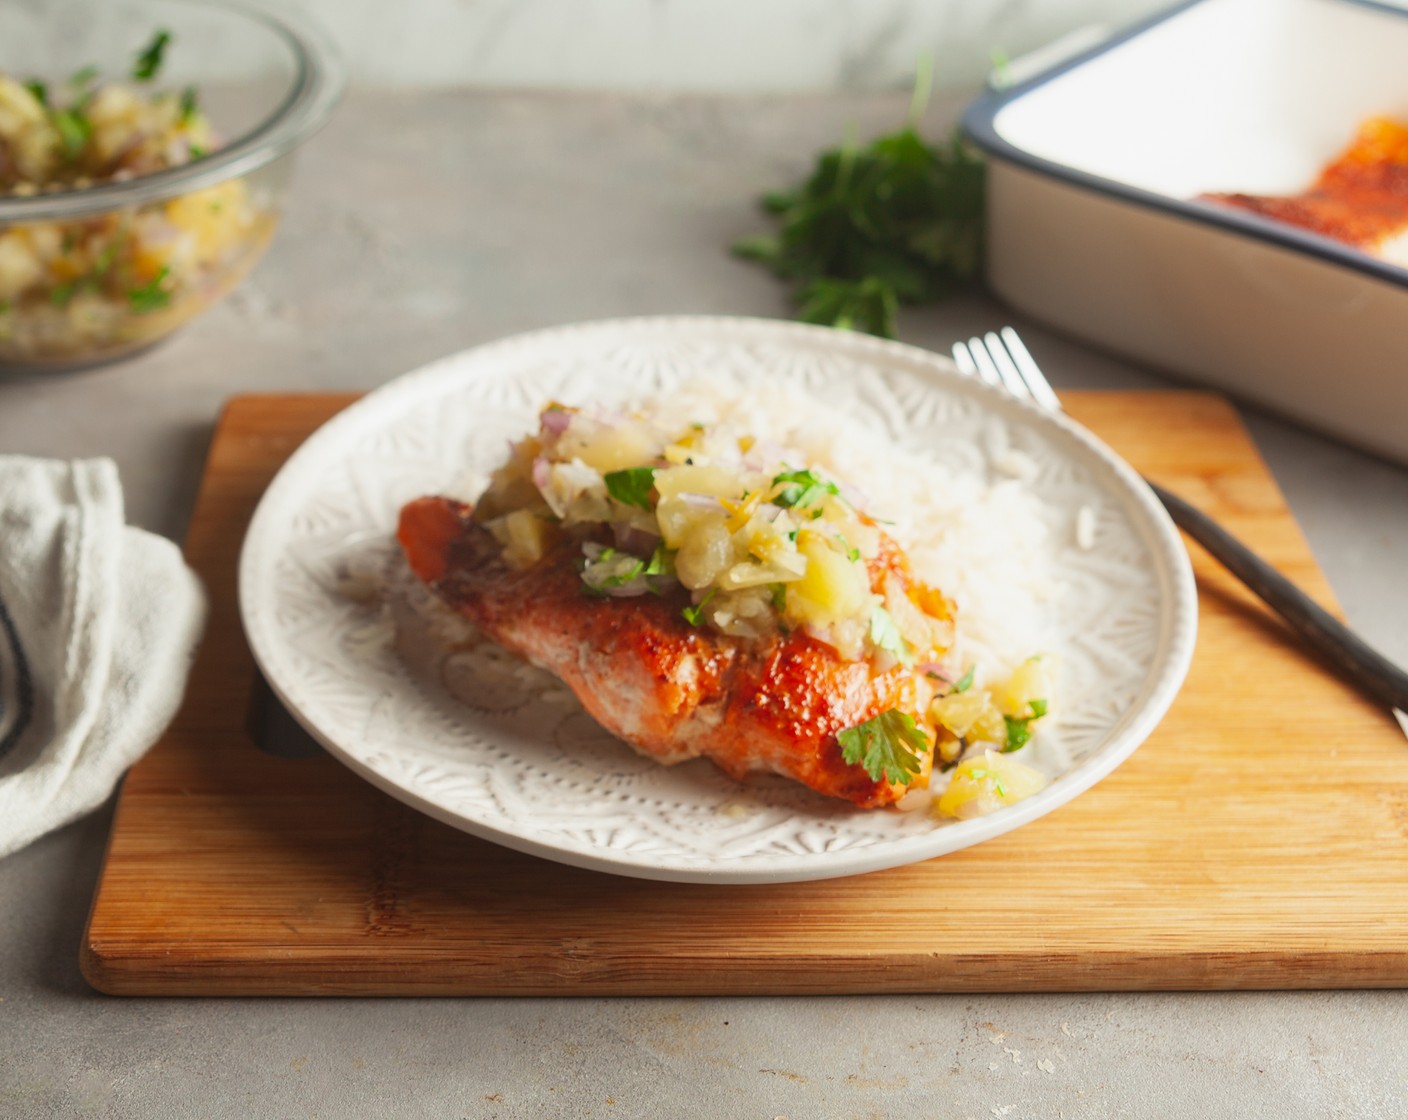 Spice Rubbed Baked Salmon with Pineapple Salsa